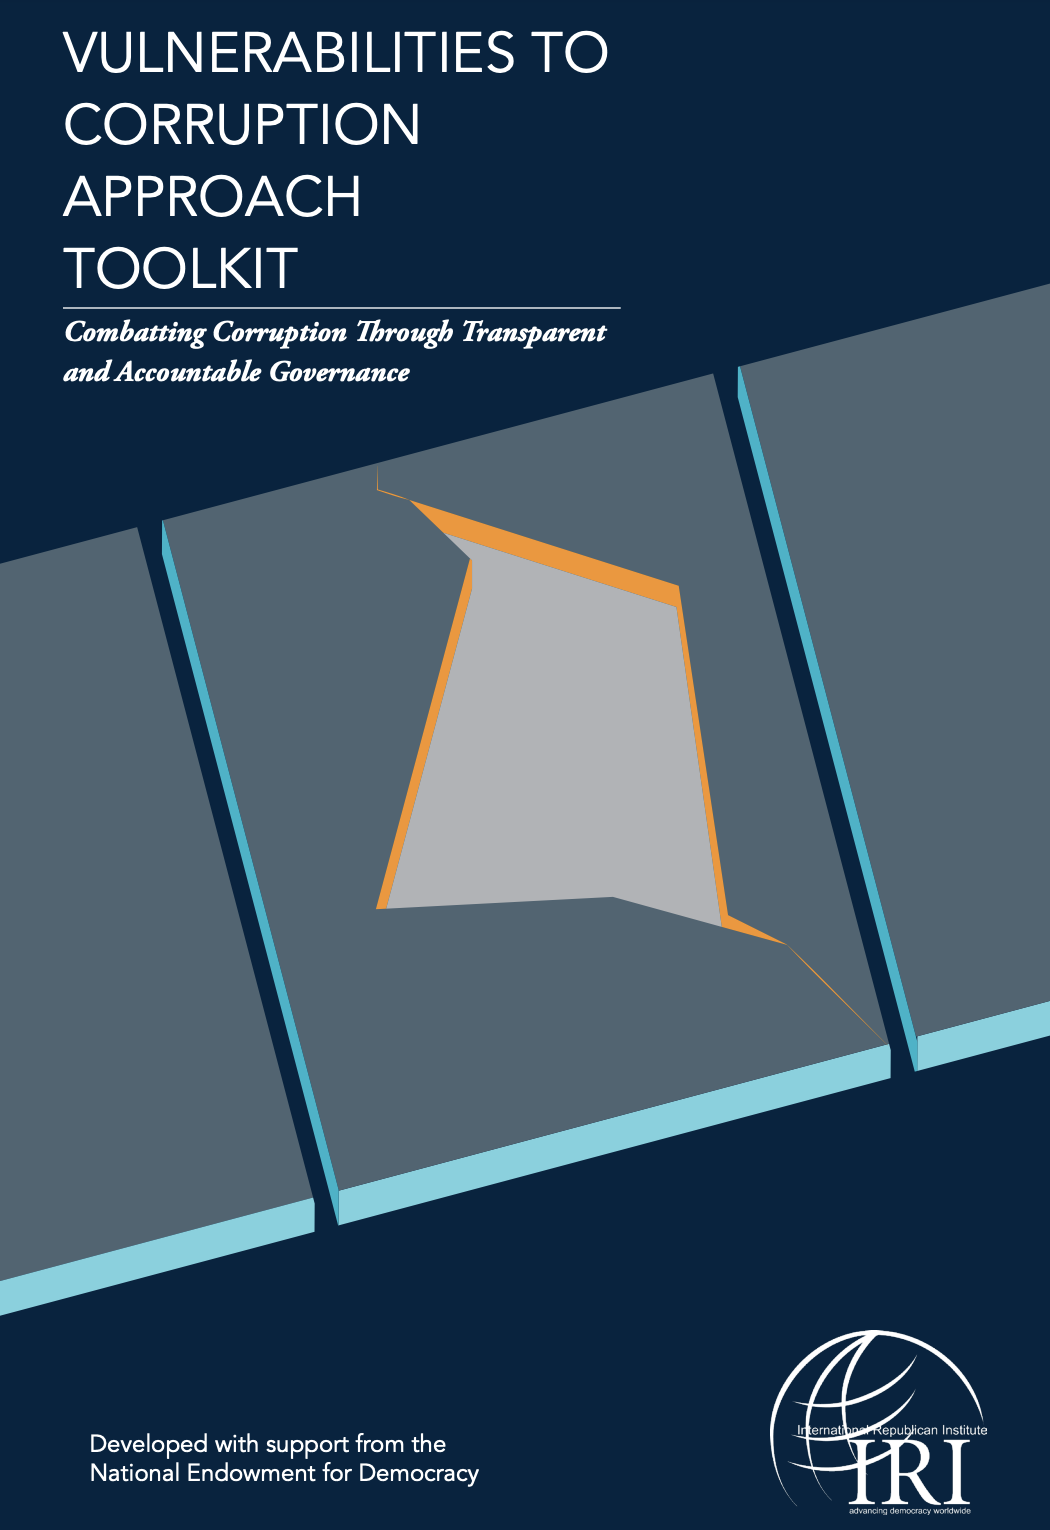 VULNERABILITIES TO CORRUPTION APPROACH TOOLKIT: Combatting Corruption Through Transparent and Accountable Governance